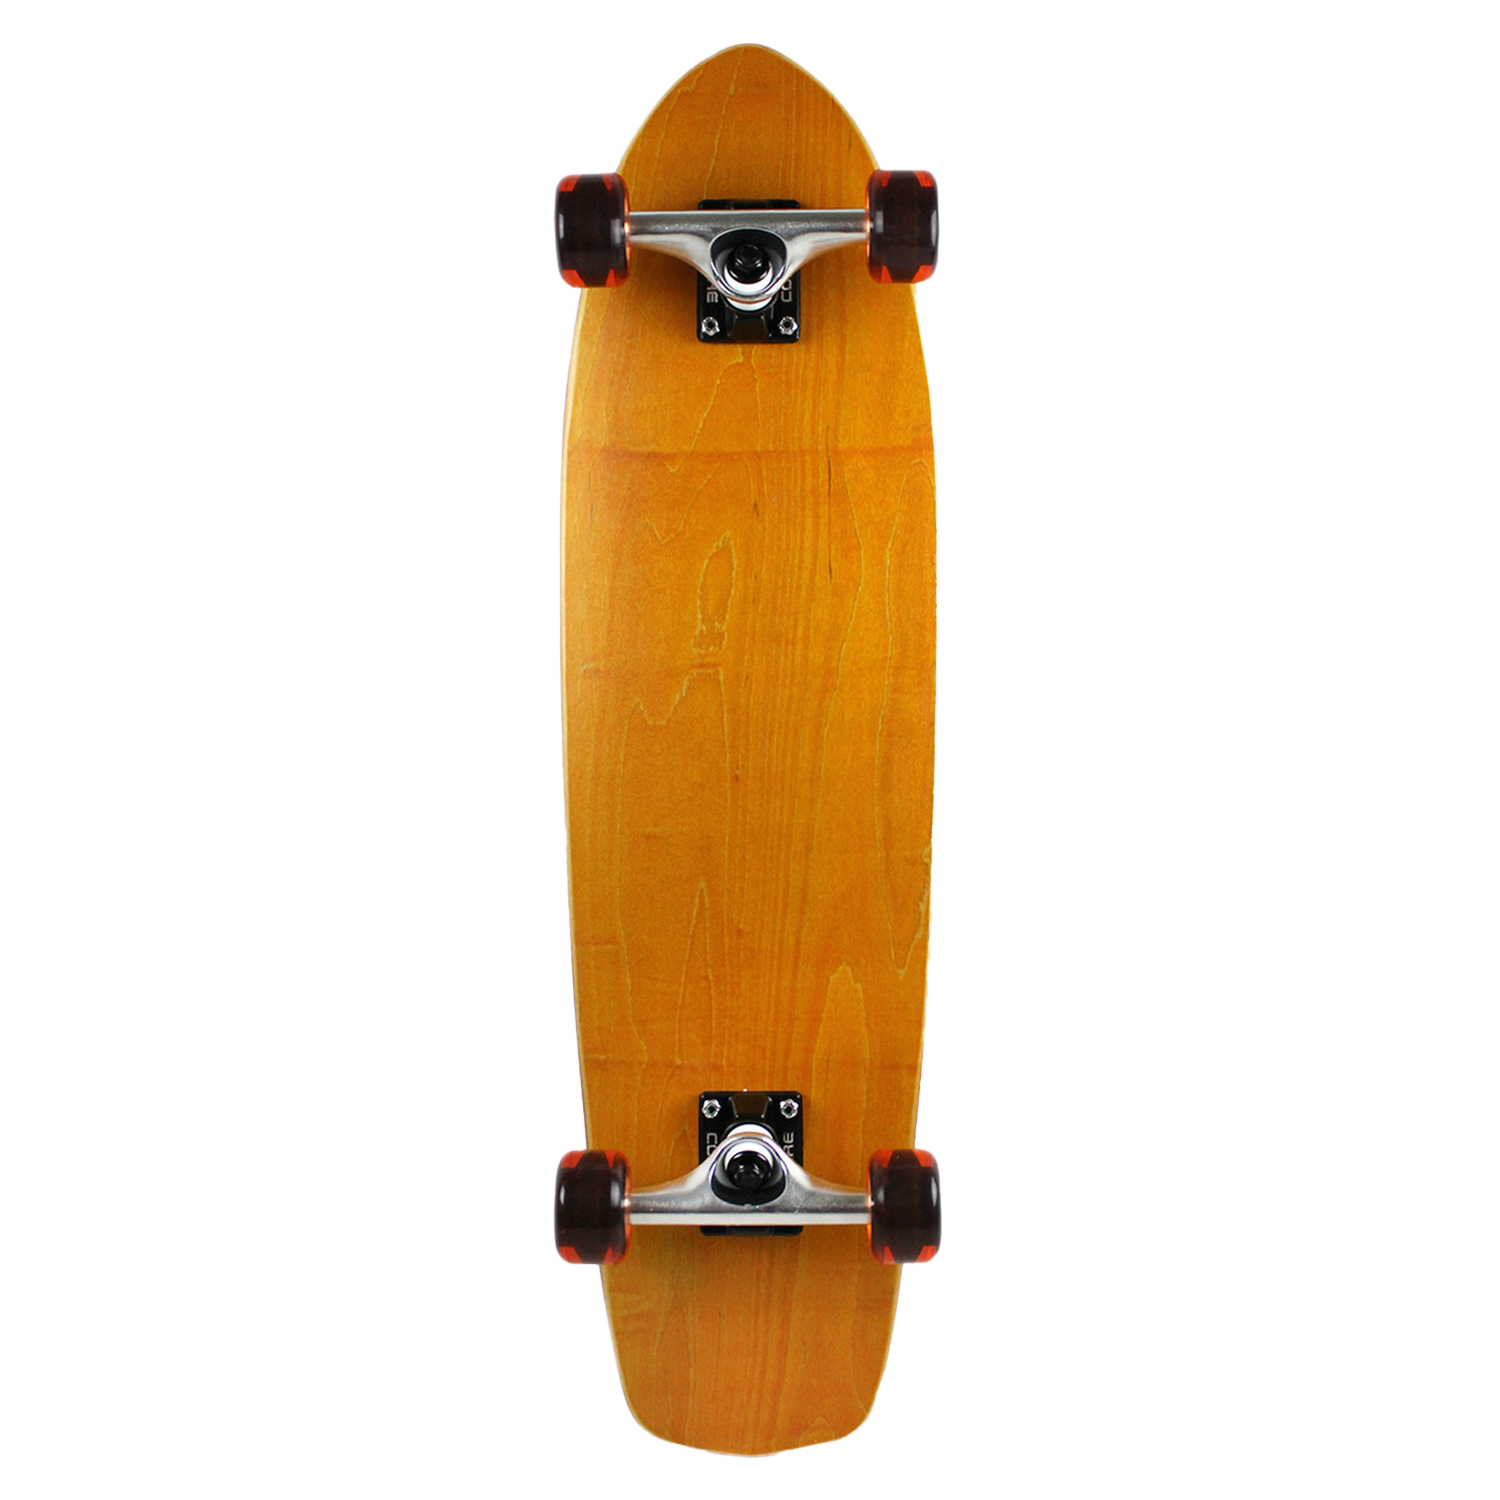 Moose Skateboard Cruiser Complete 7 Ply North American Maple Stain Orange 8.25in x 31in